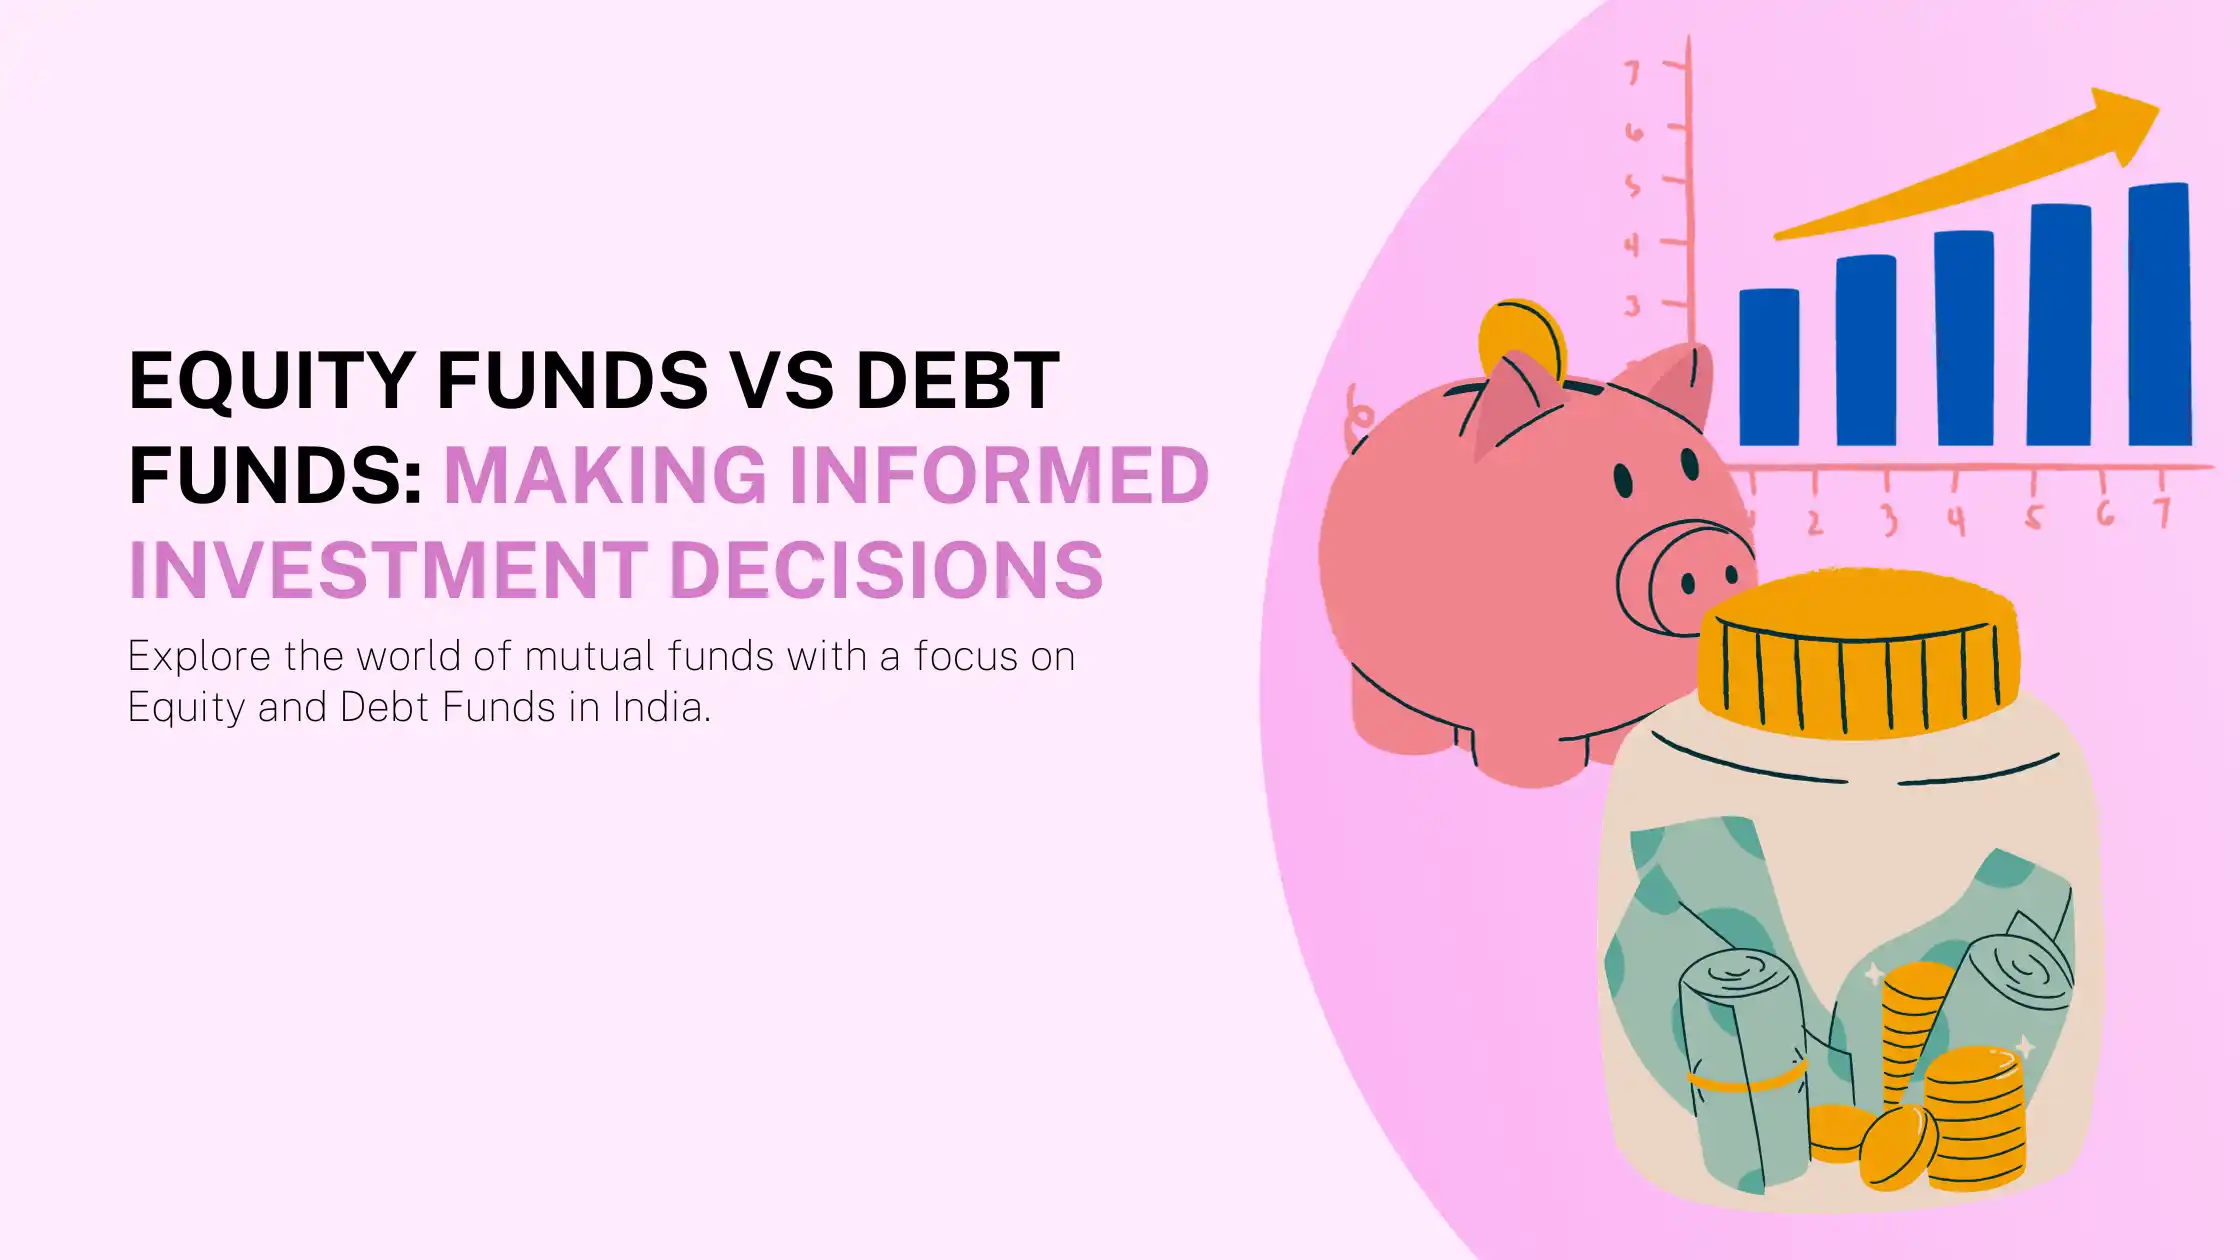 Equity Funds vs Debt Funds: Making Informed Investment Decisions